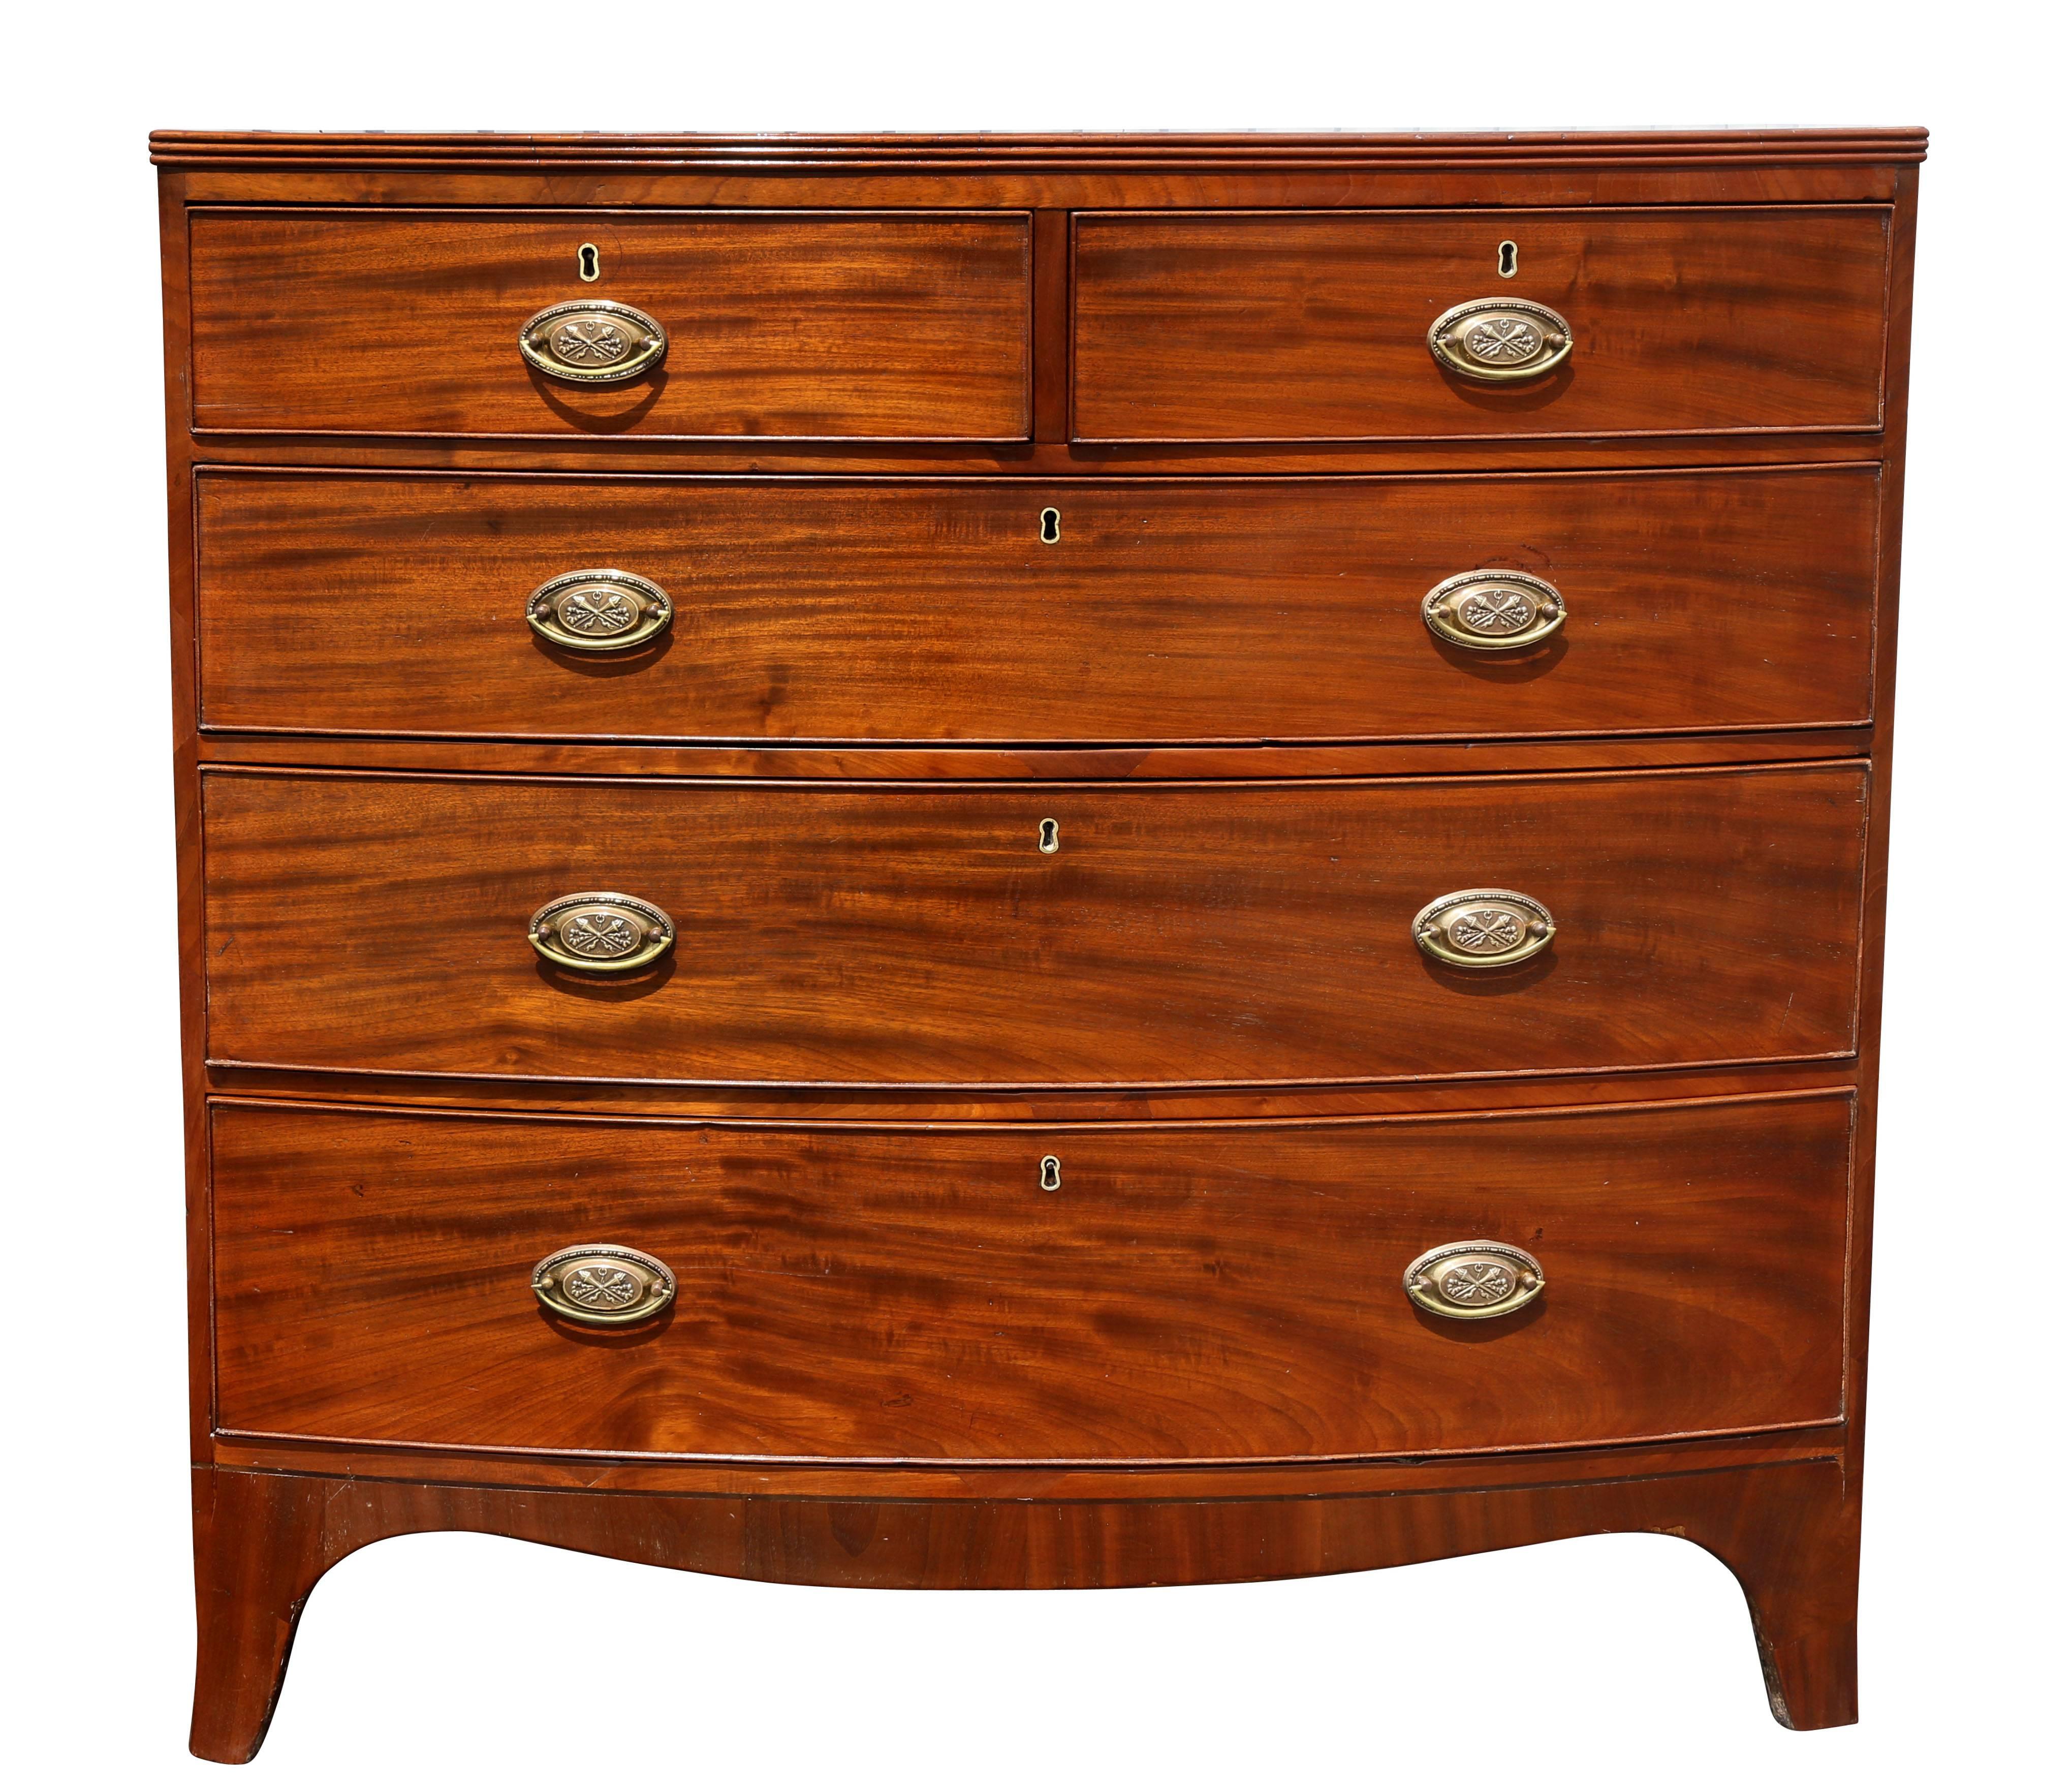 Bowed top and conforming base with two over three graduated drawers, splayed feet. Oval brass handles.